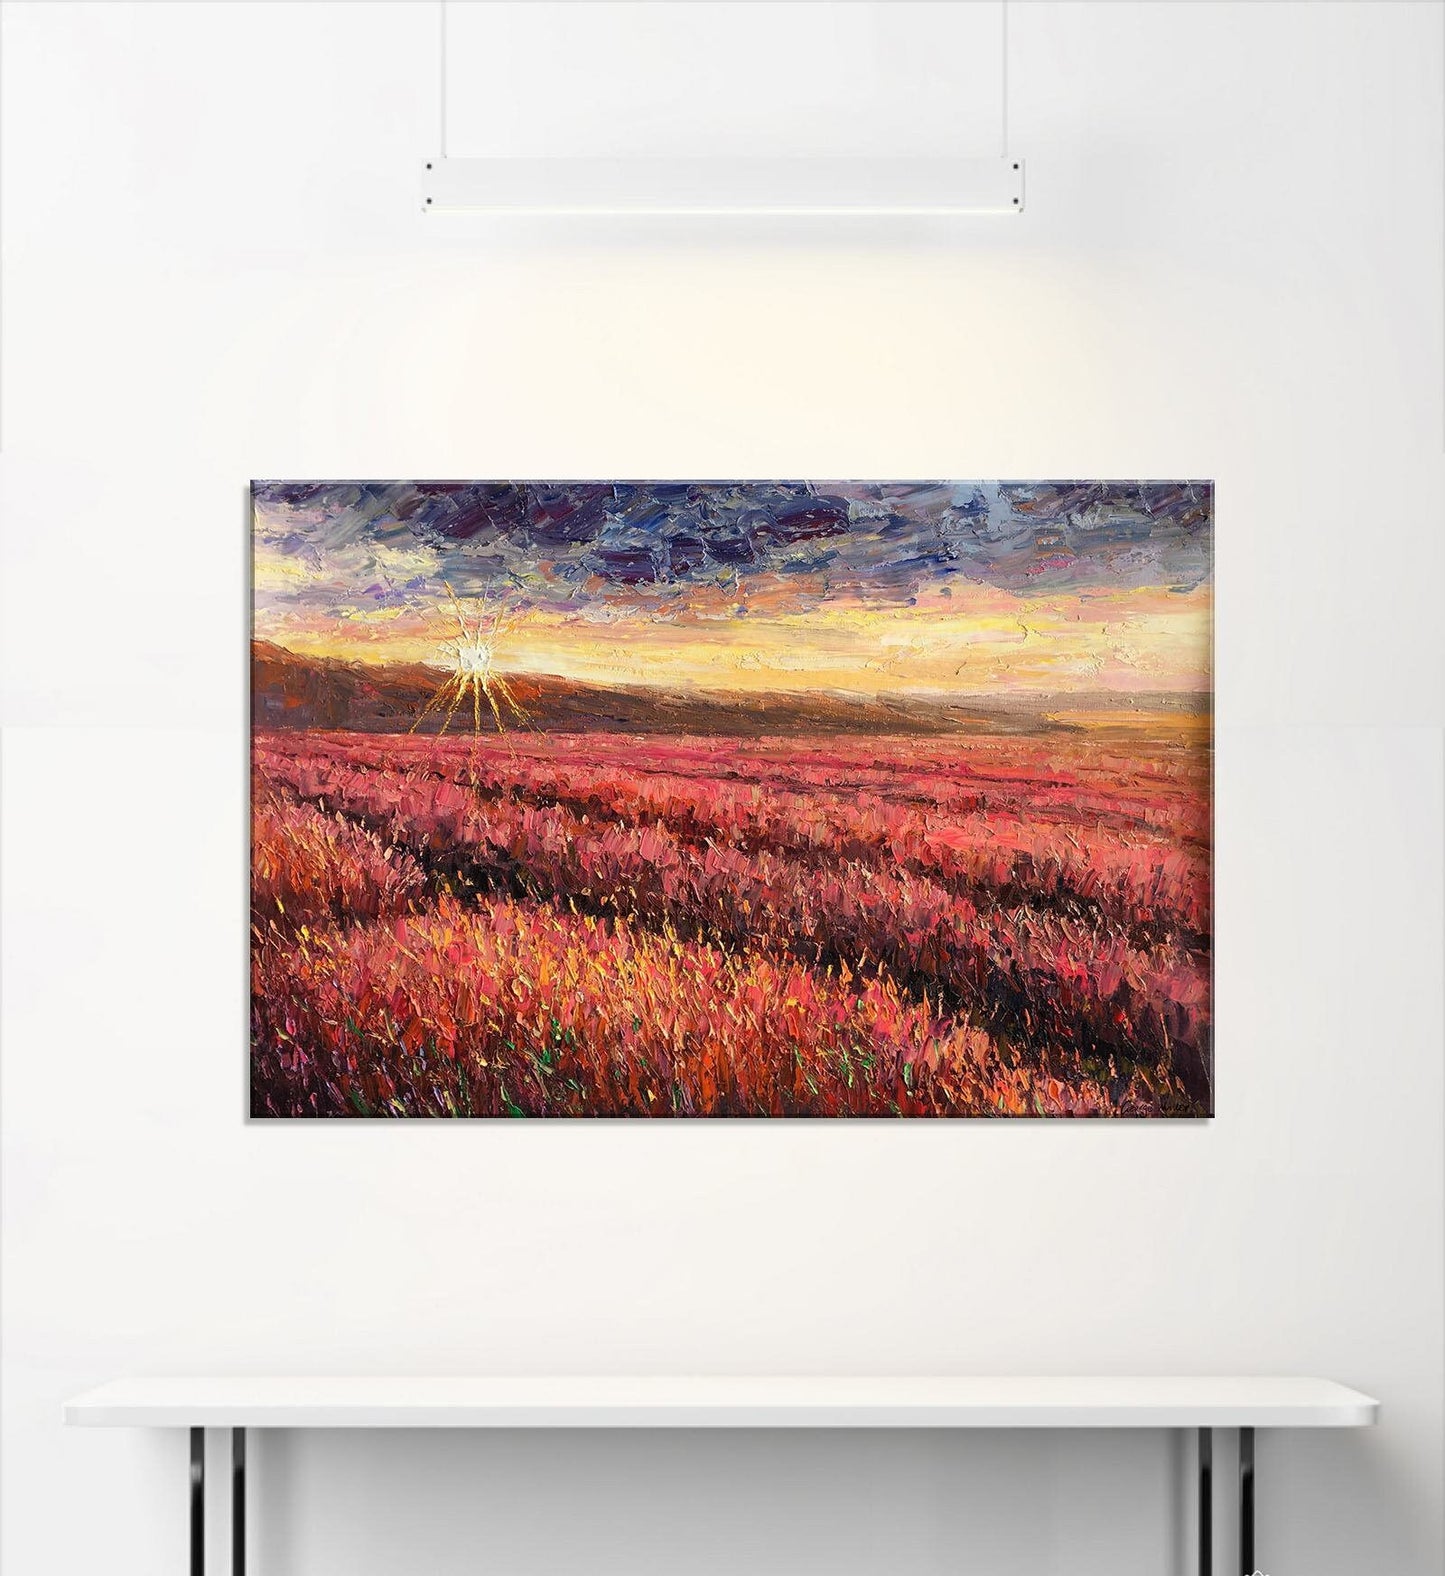 Beautiful Oil Painting Tuscany Landscape Sunset, 32x48 inches ready to hang, Canvas Wall Art, Oil On Canvas Painting, Oversized Wall Art